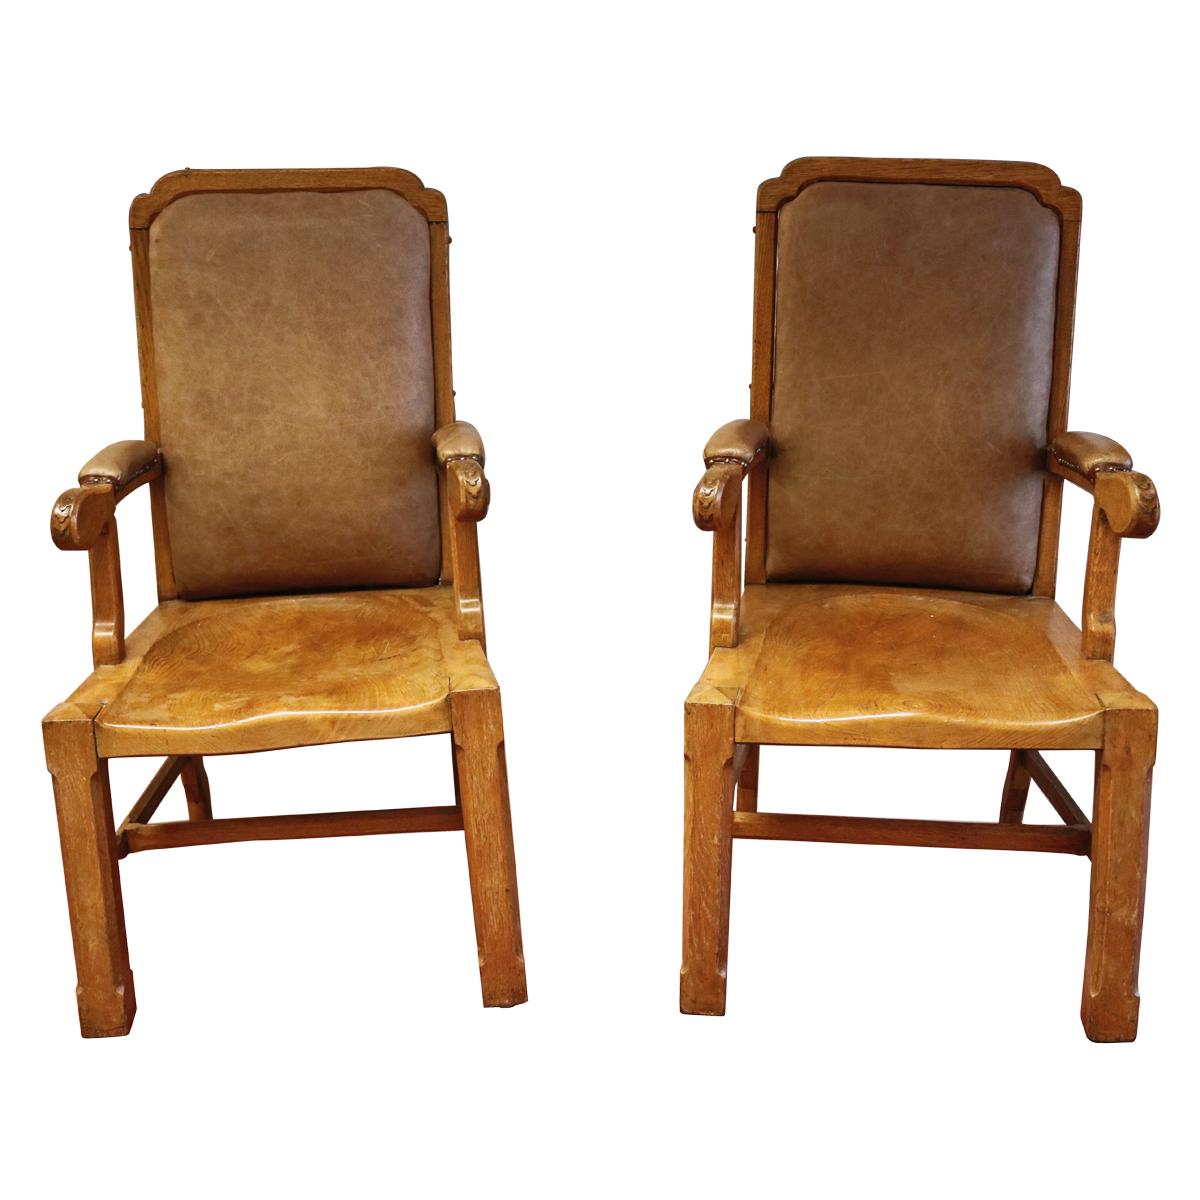 Pair of Oak and Leather Upholstered Armchairs, circa 1900 For Sale